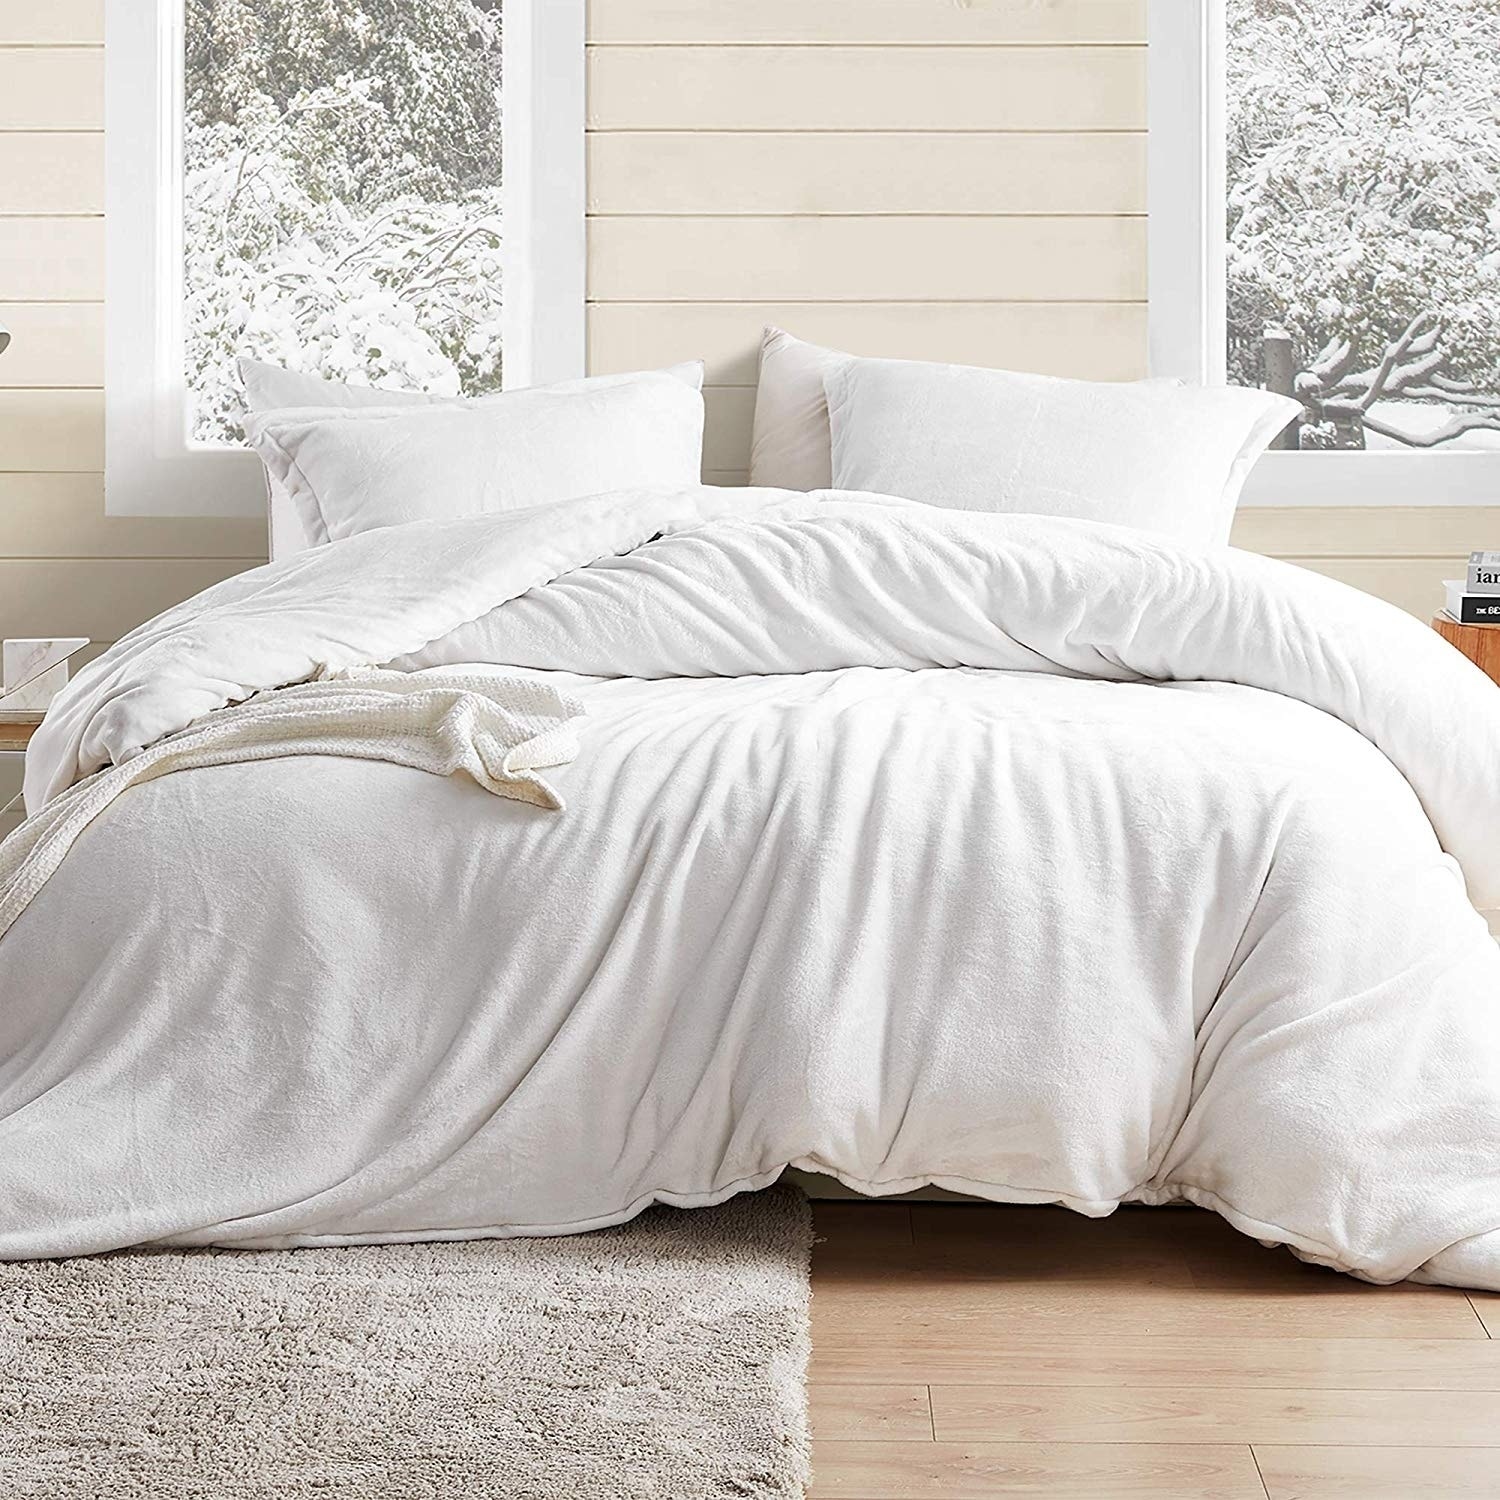 Shop Coma Inducer Oversized Duvet Cover Wait Oh What Farmhouse